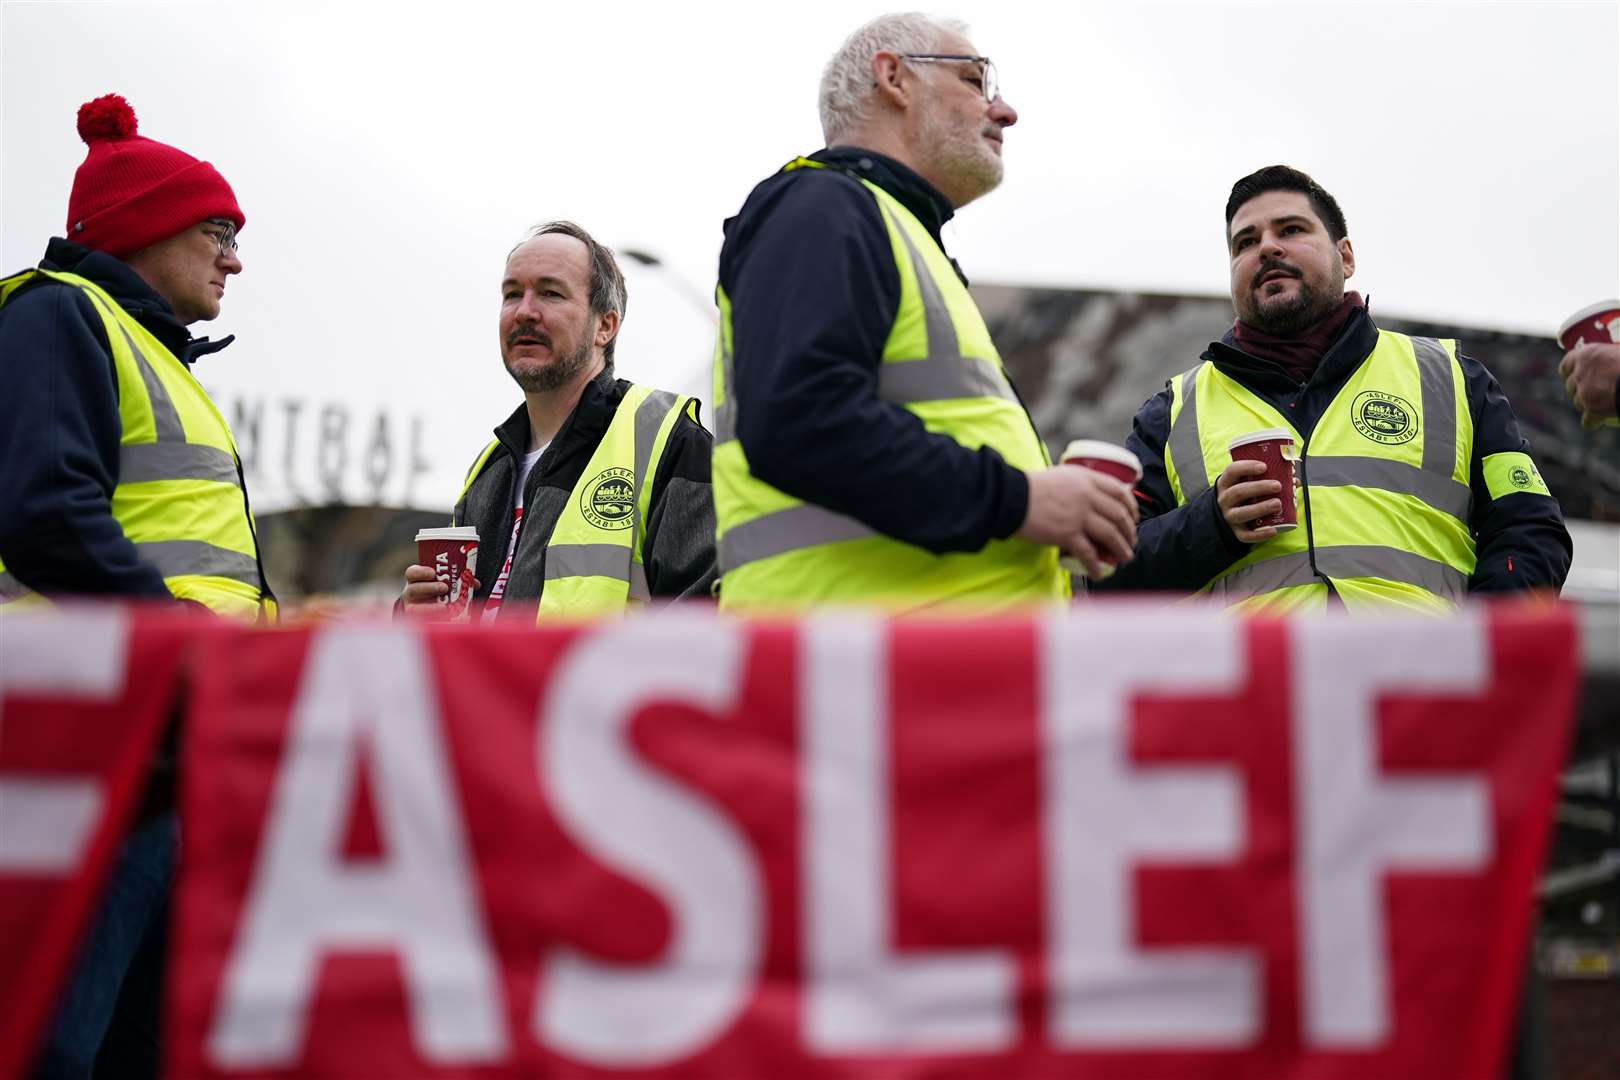 Members of the Aslef union picket at New Street railway station in Birmingham (Jacob King/PA)